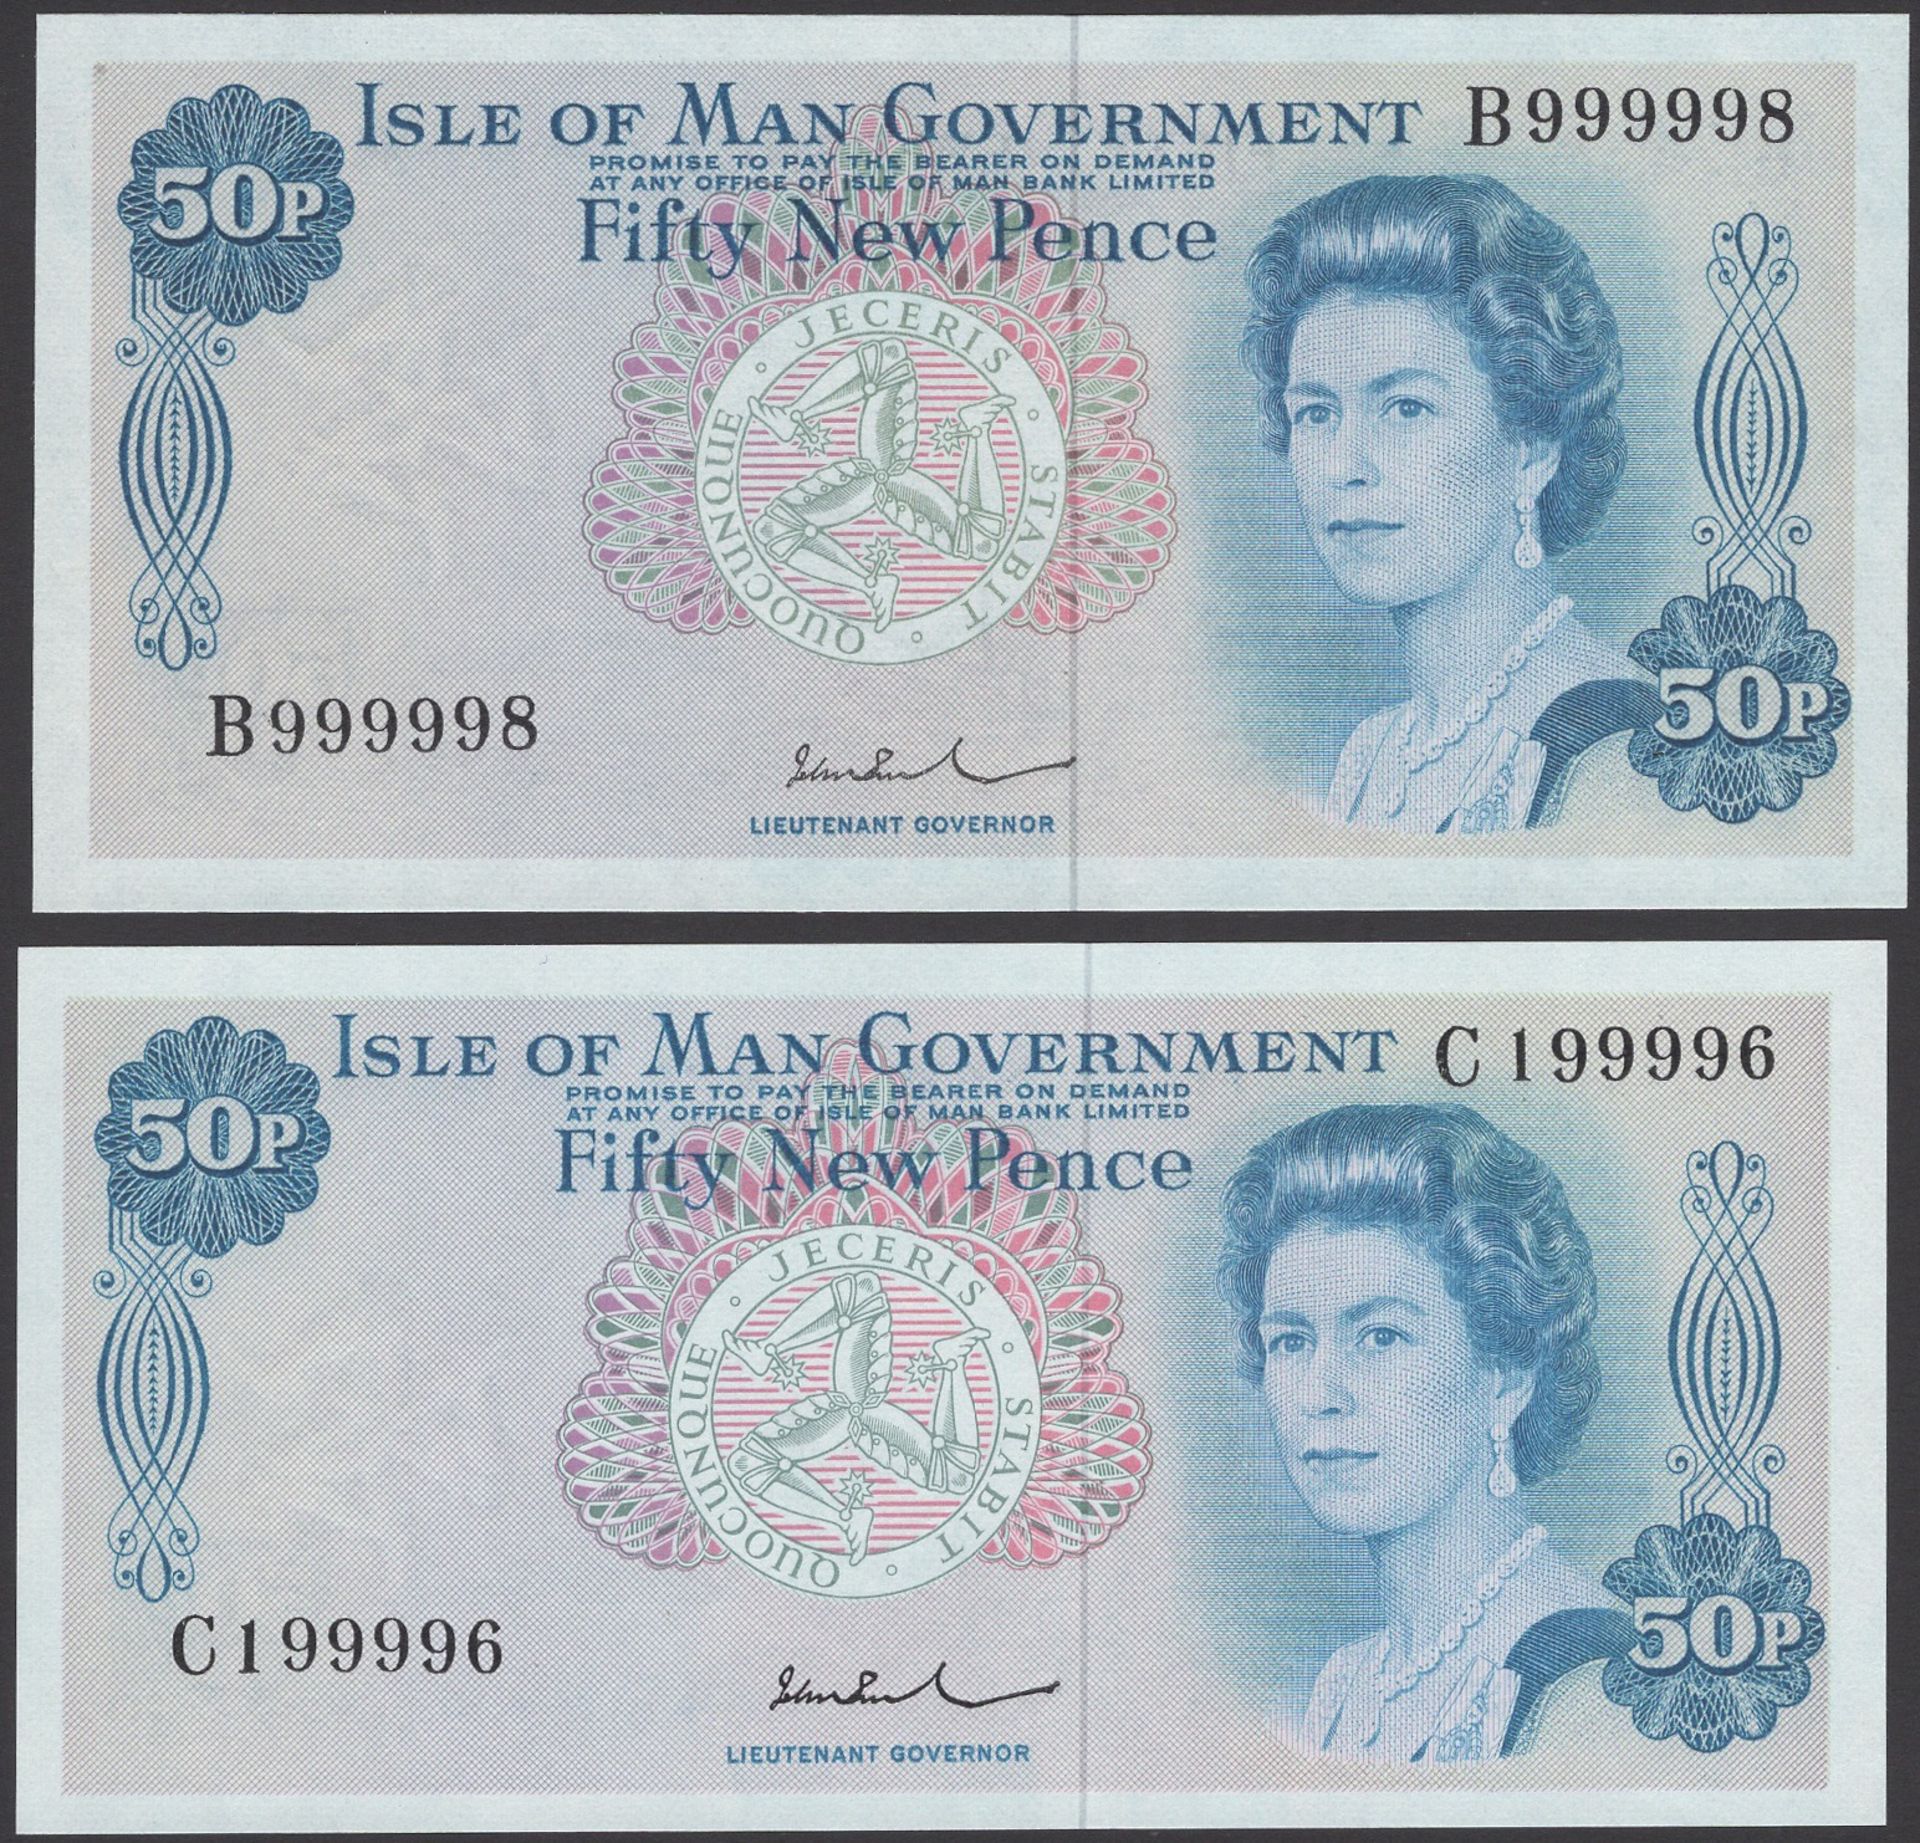 Isle of Man Government, John W. Paul, 50 New Pence (2), ND (1979), serial numbers B999998 an...